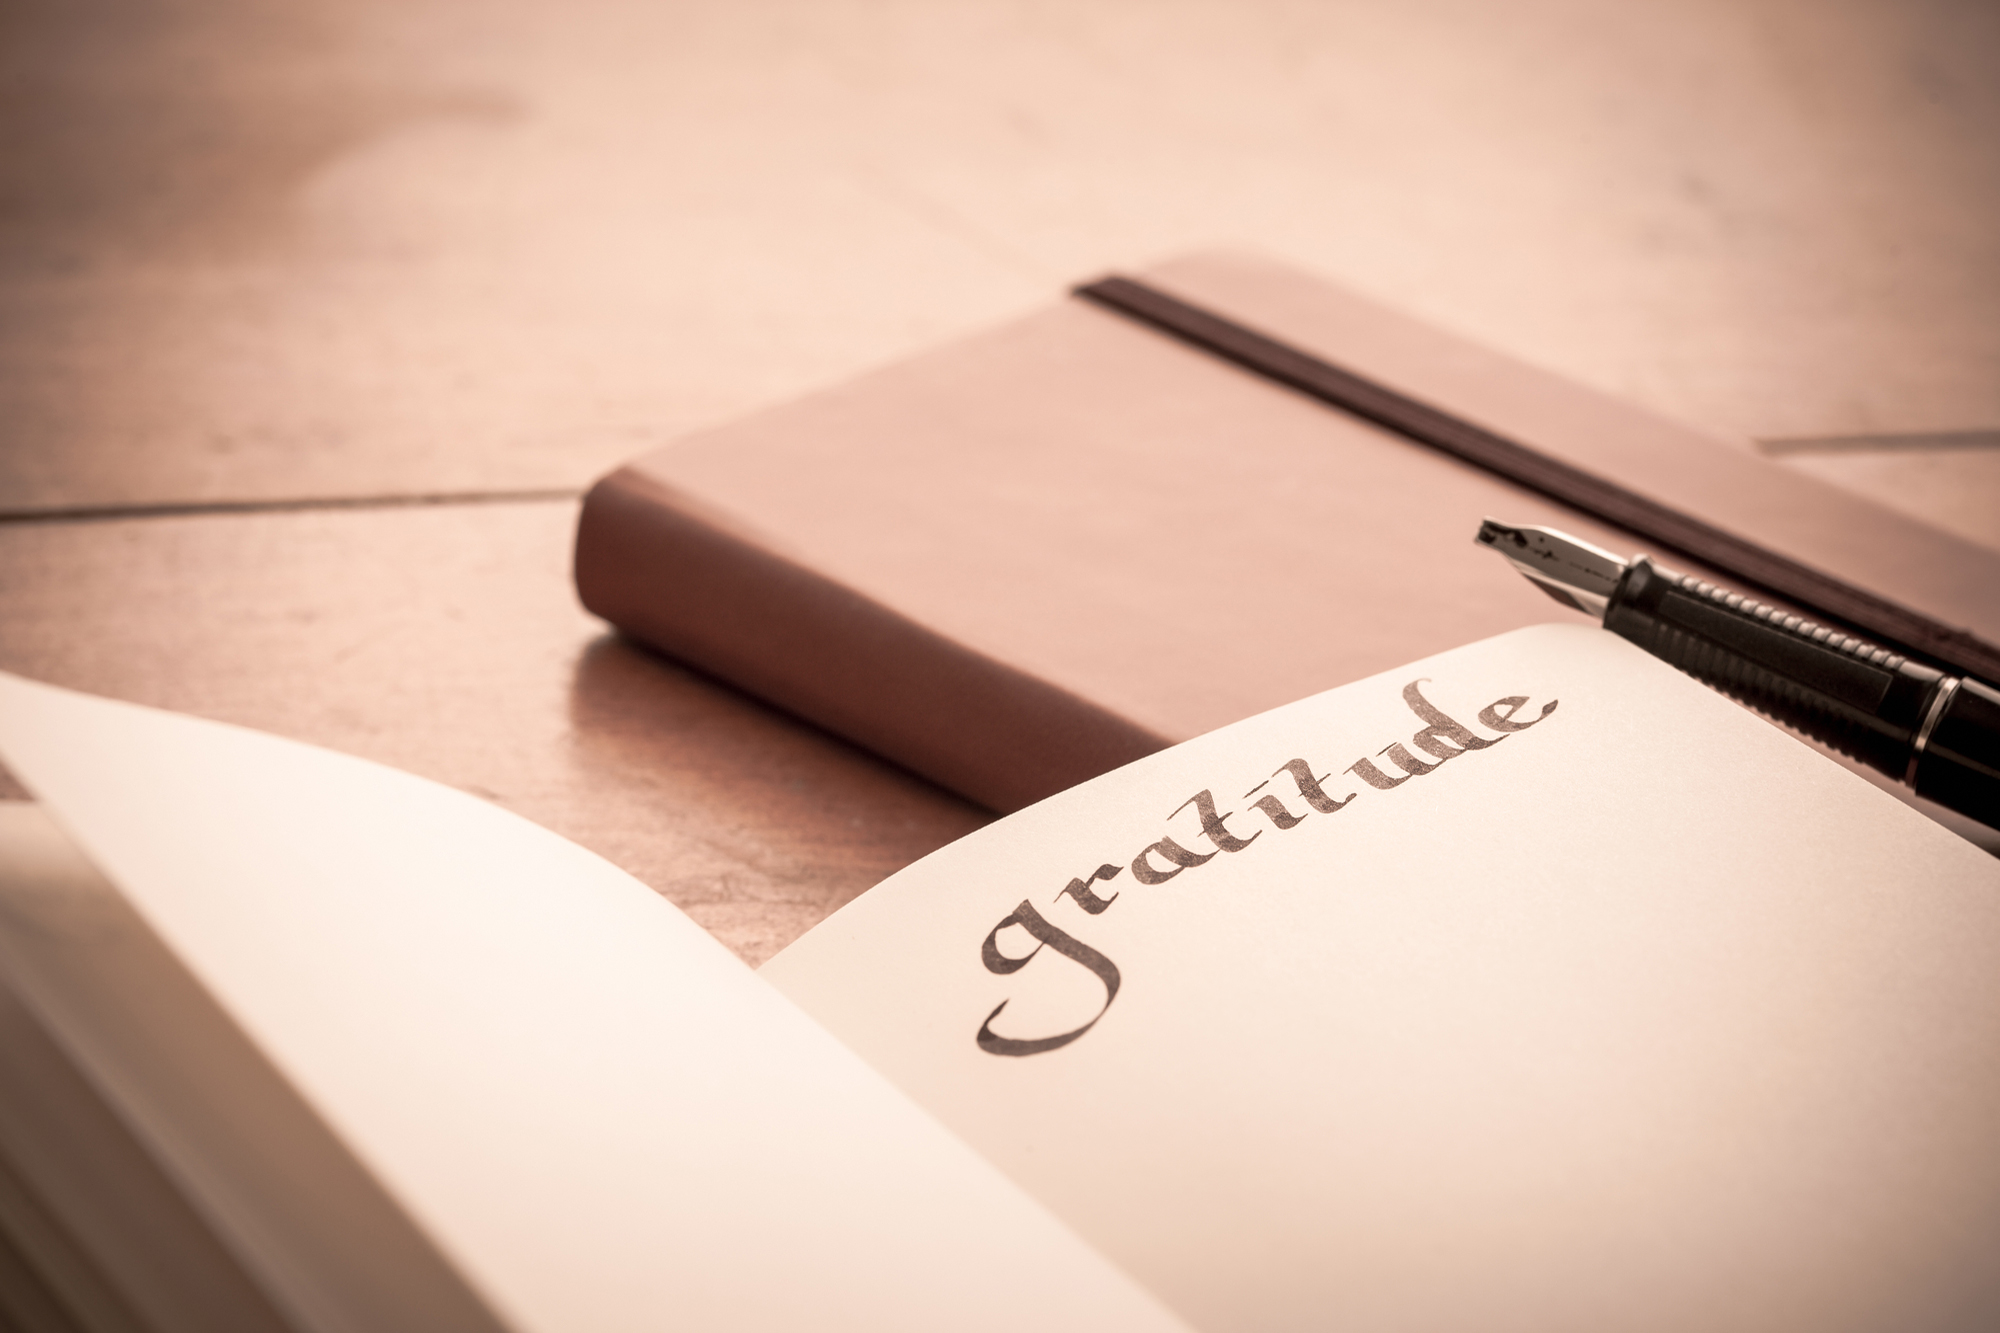 How Keeping a Gratitude Journal Changed My Life